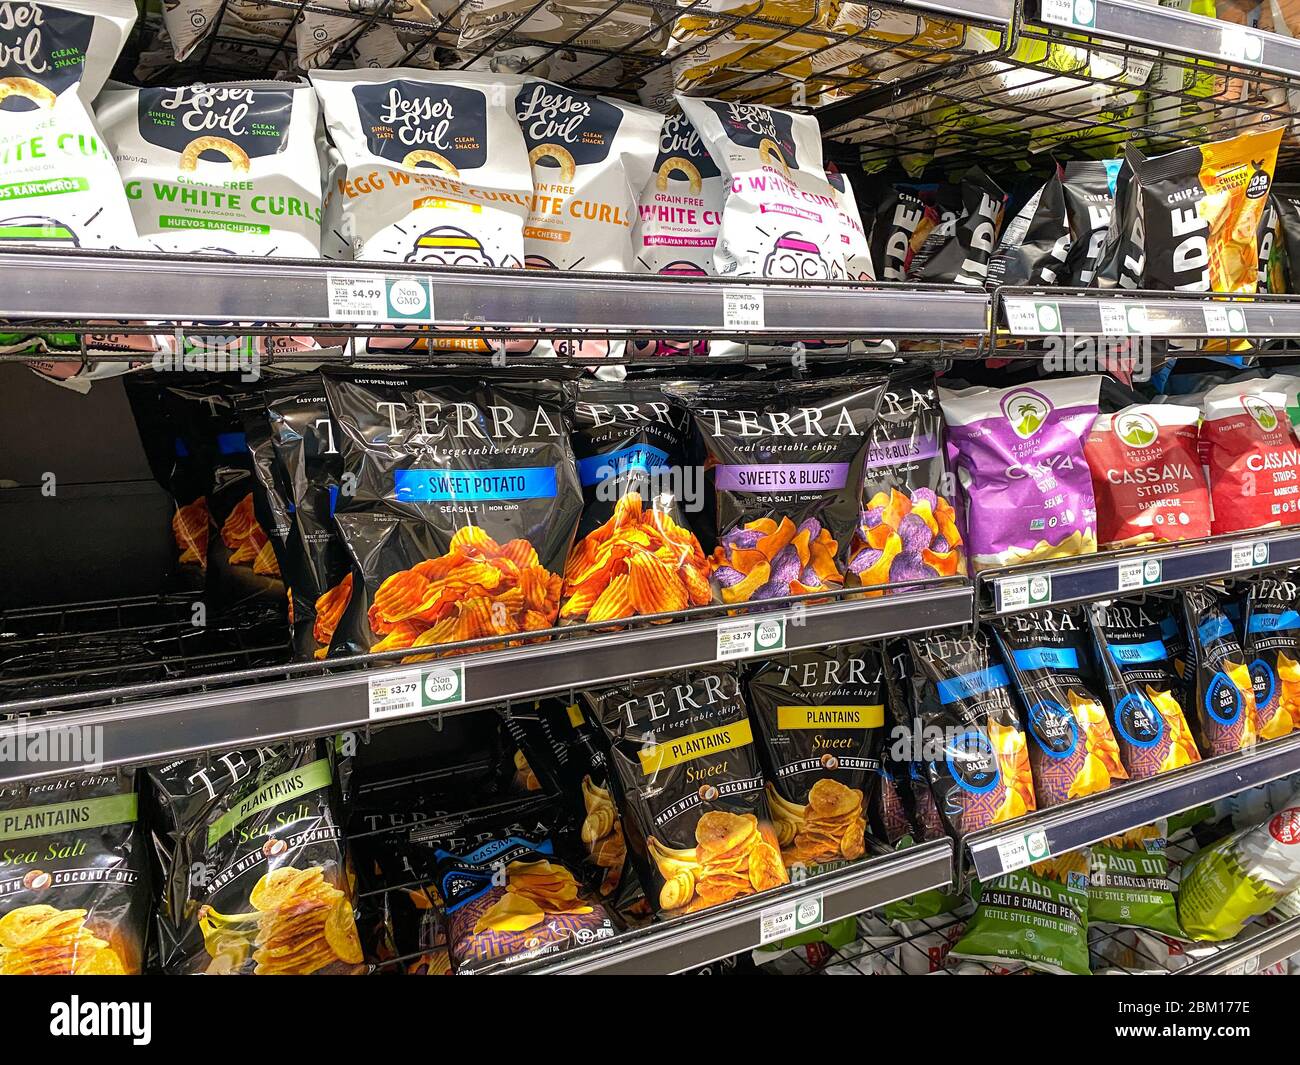 Orlando,FL/USA-5/3/20: A display of Potato, Plantain, and Cassava Chips at a Whole Foods Market Grocery Store. Stock Photo